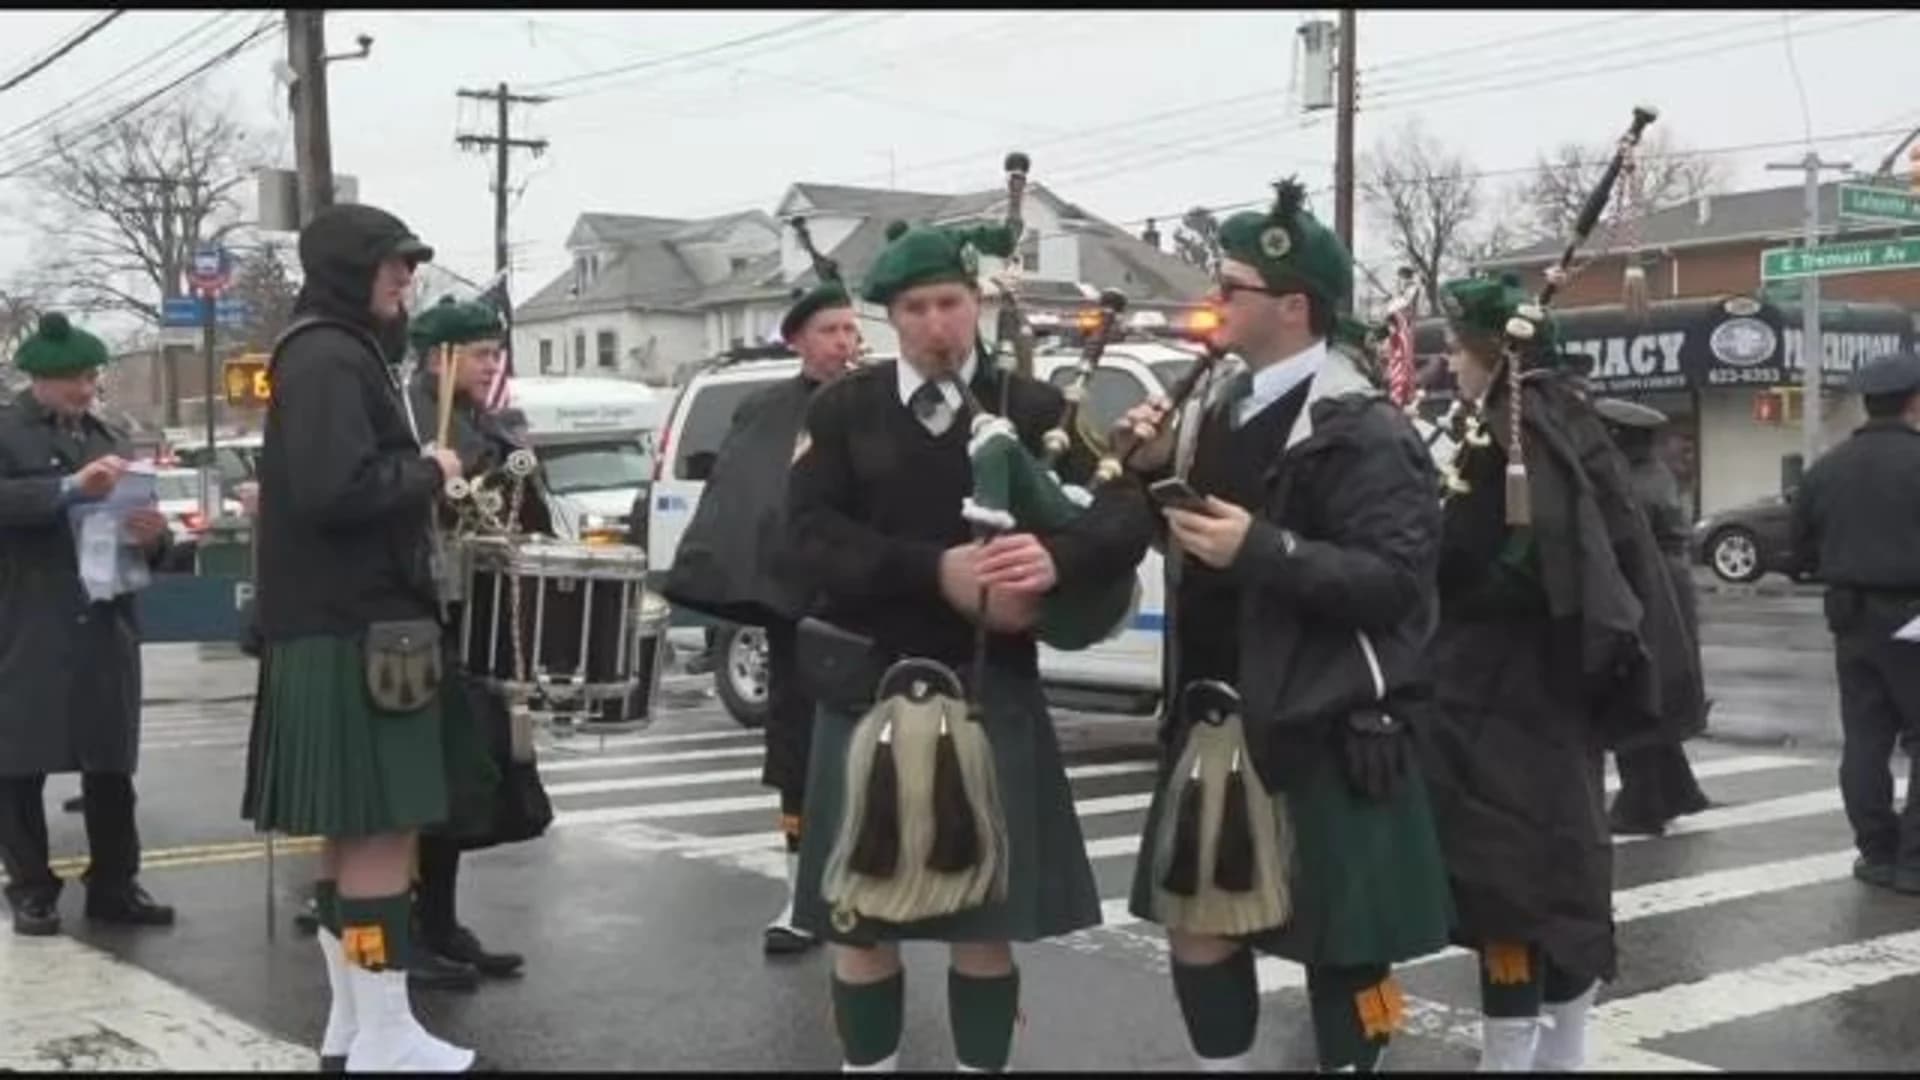 Rain doesn’t put damper on Throgs Neck St. Patrick's Day Parade